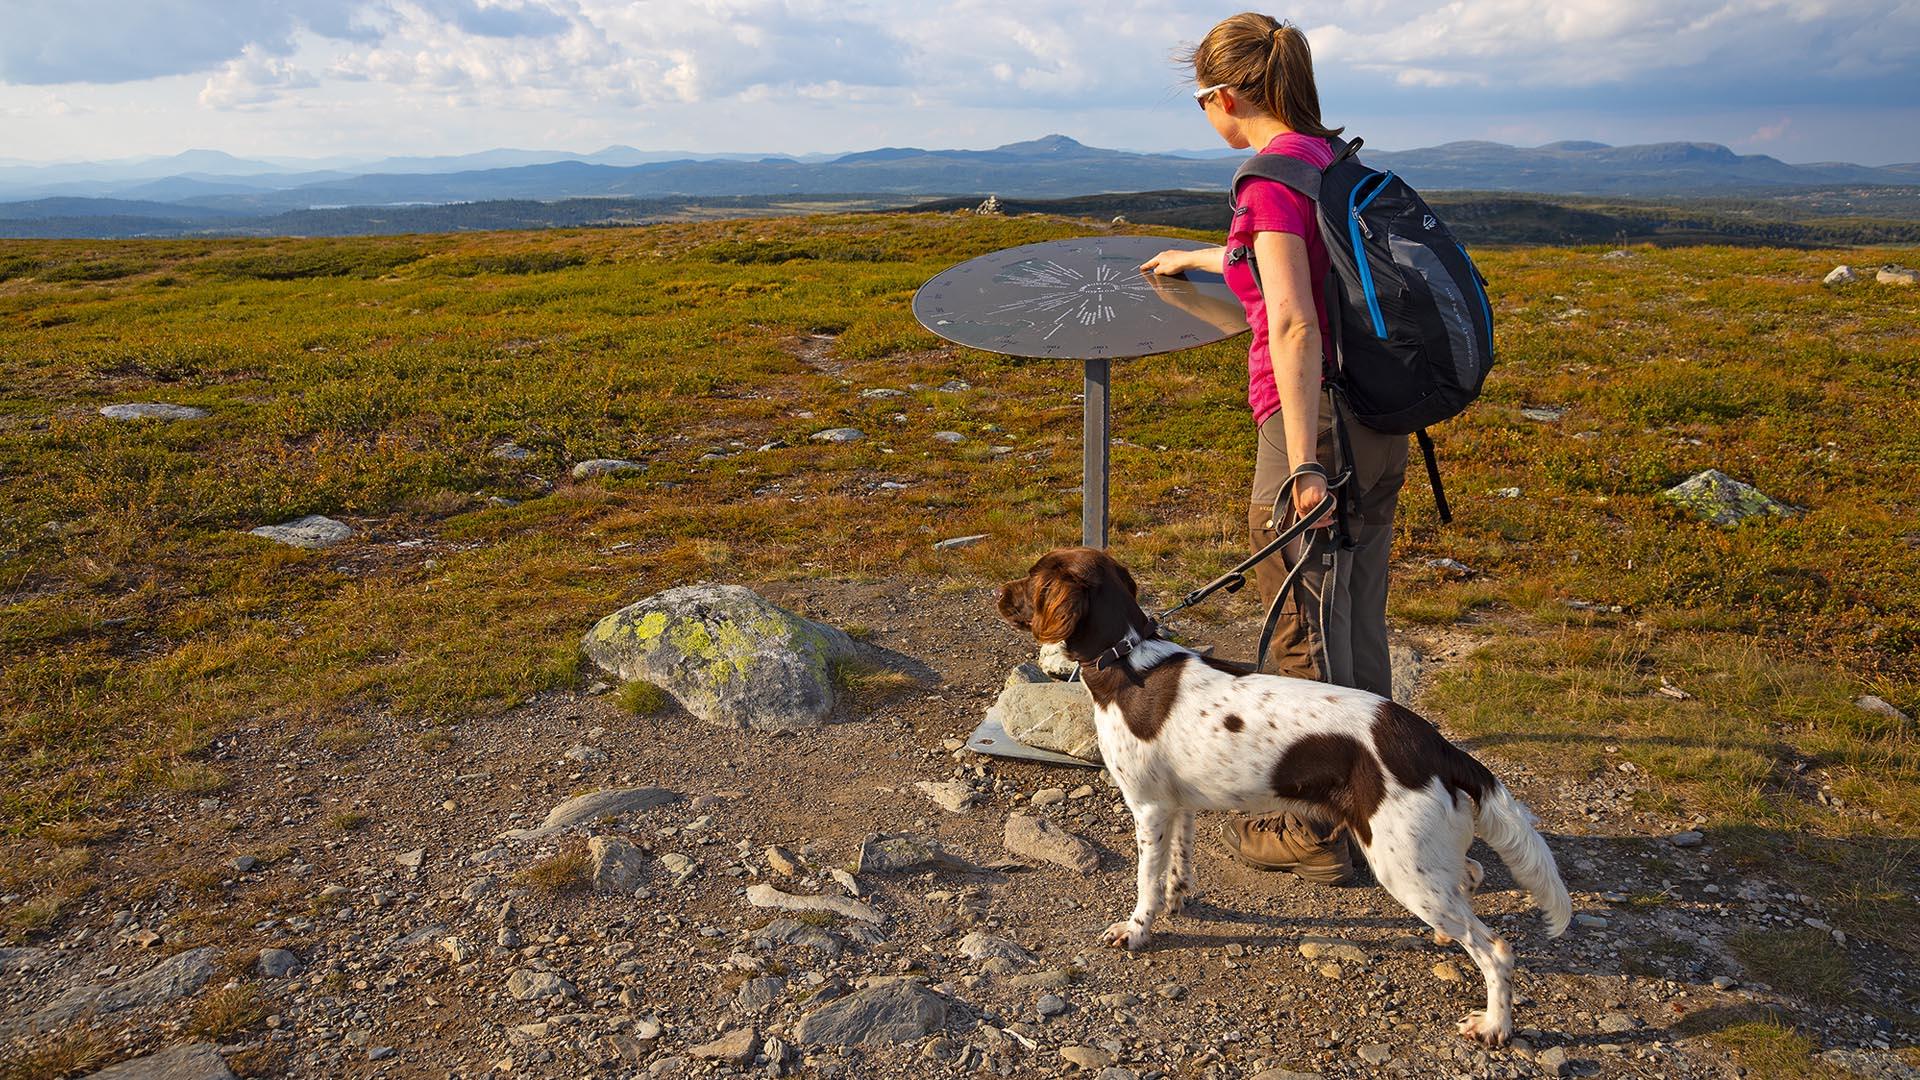 A ldy hiker in a t-shirt with a backpack and a dog on a lead studies a board which names all the mountain tops that can bee seen on the horizon.